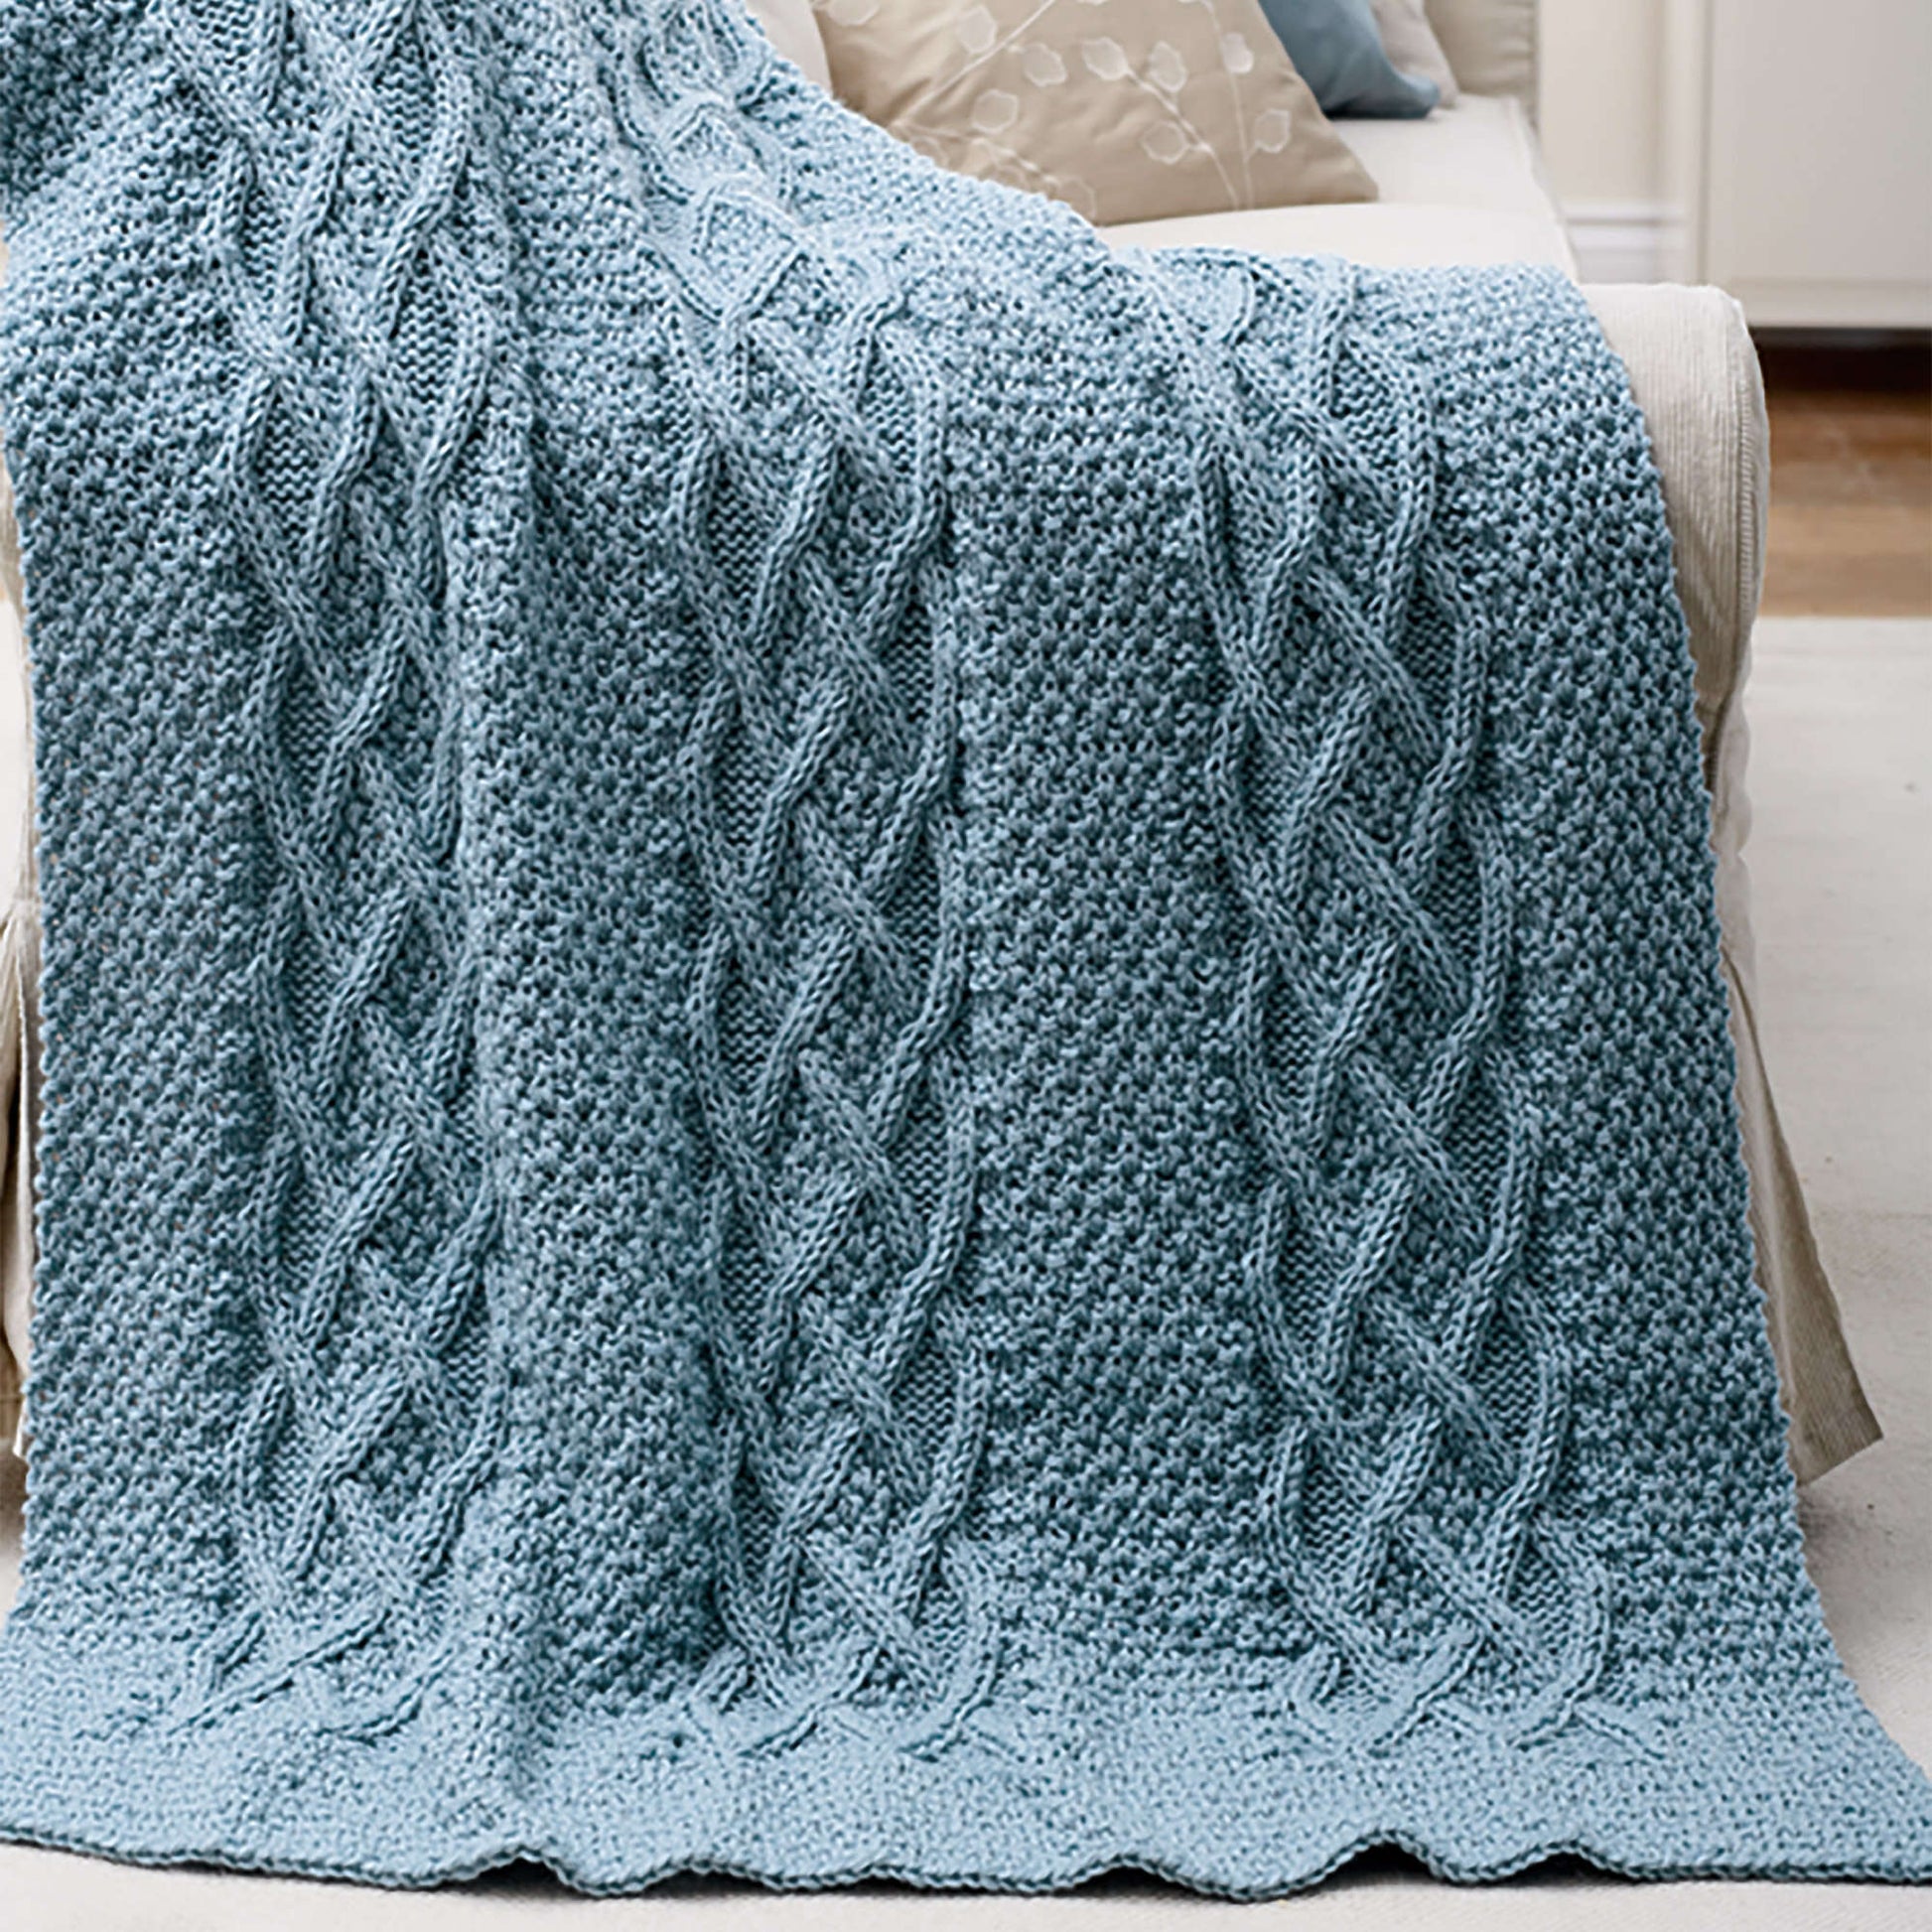 Free Patons Cushy Cables Afghan Knit Pattern